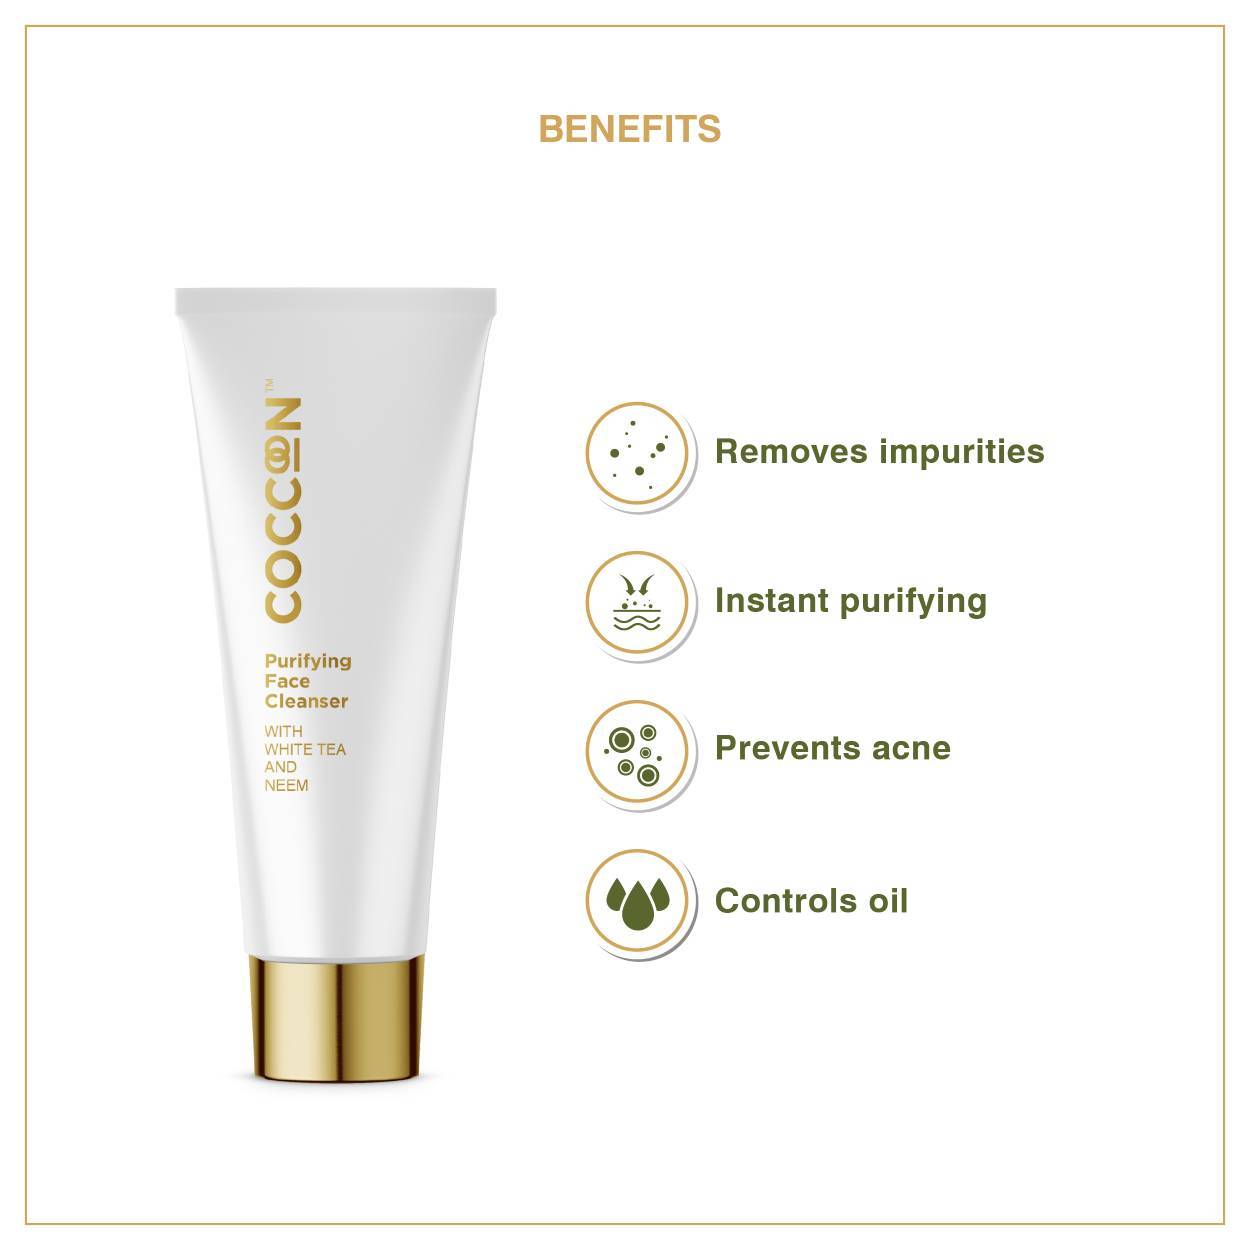 Shop Purifying Face Cleanser  from Coccoon on SublimeLife.in. Best for removing impurities and encourages moisture retention.